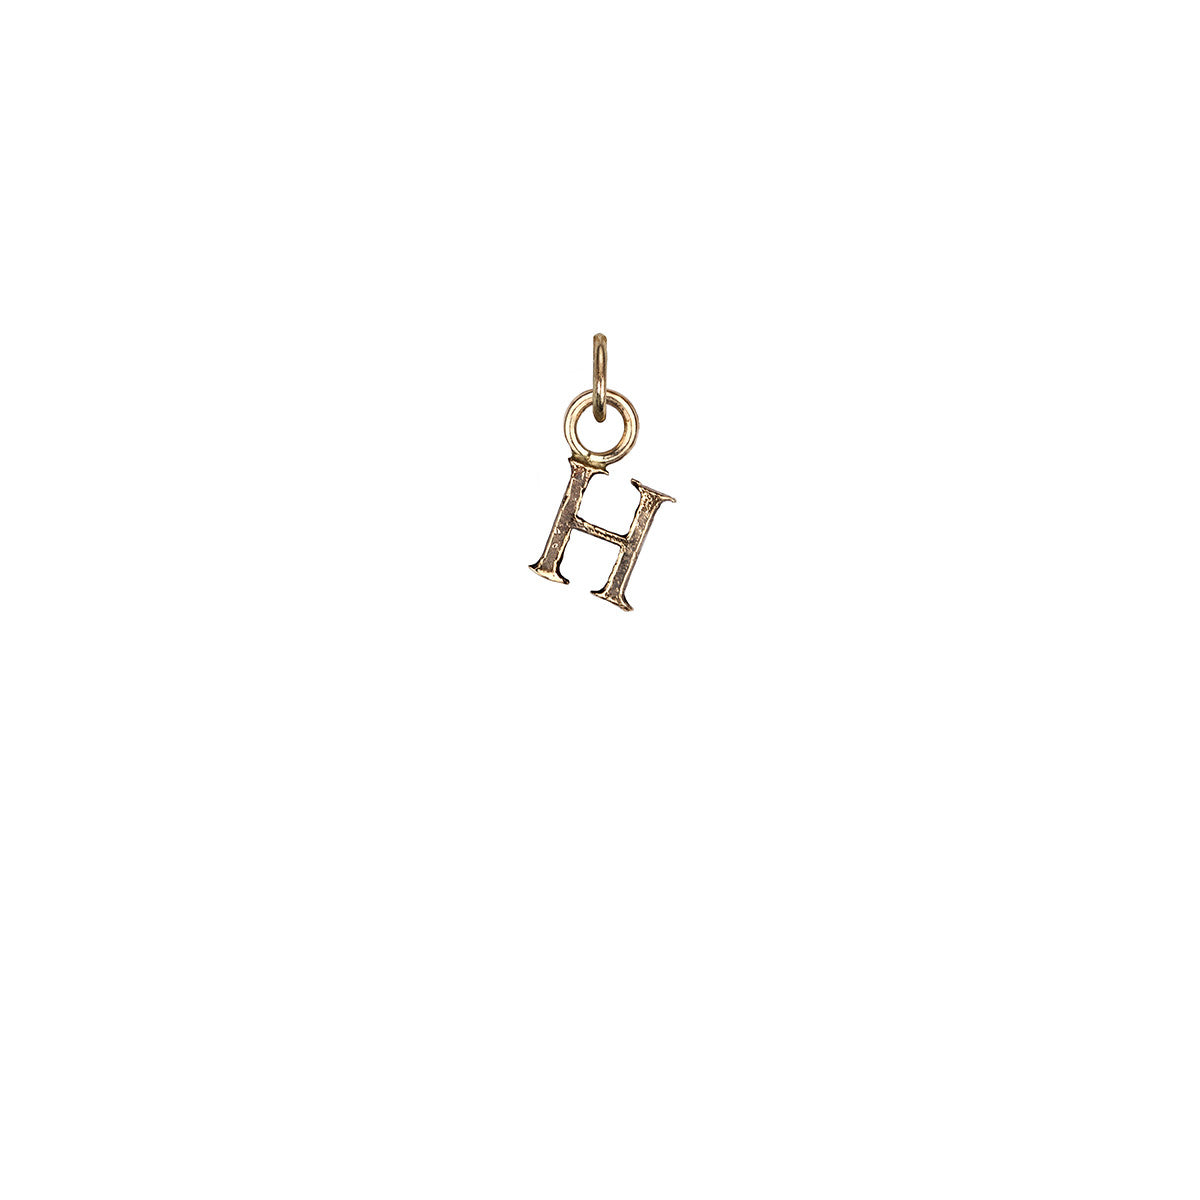 A 14k gold charm in the shape of the letter "H".